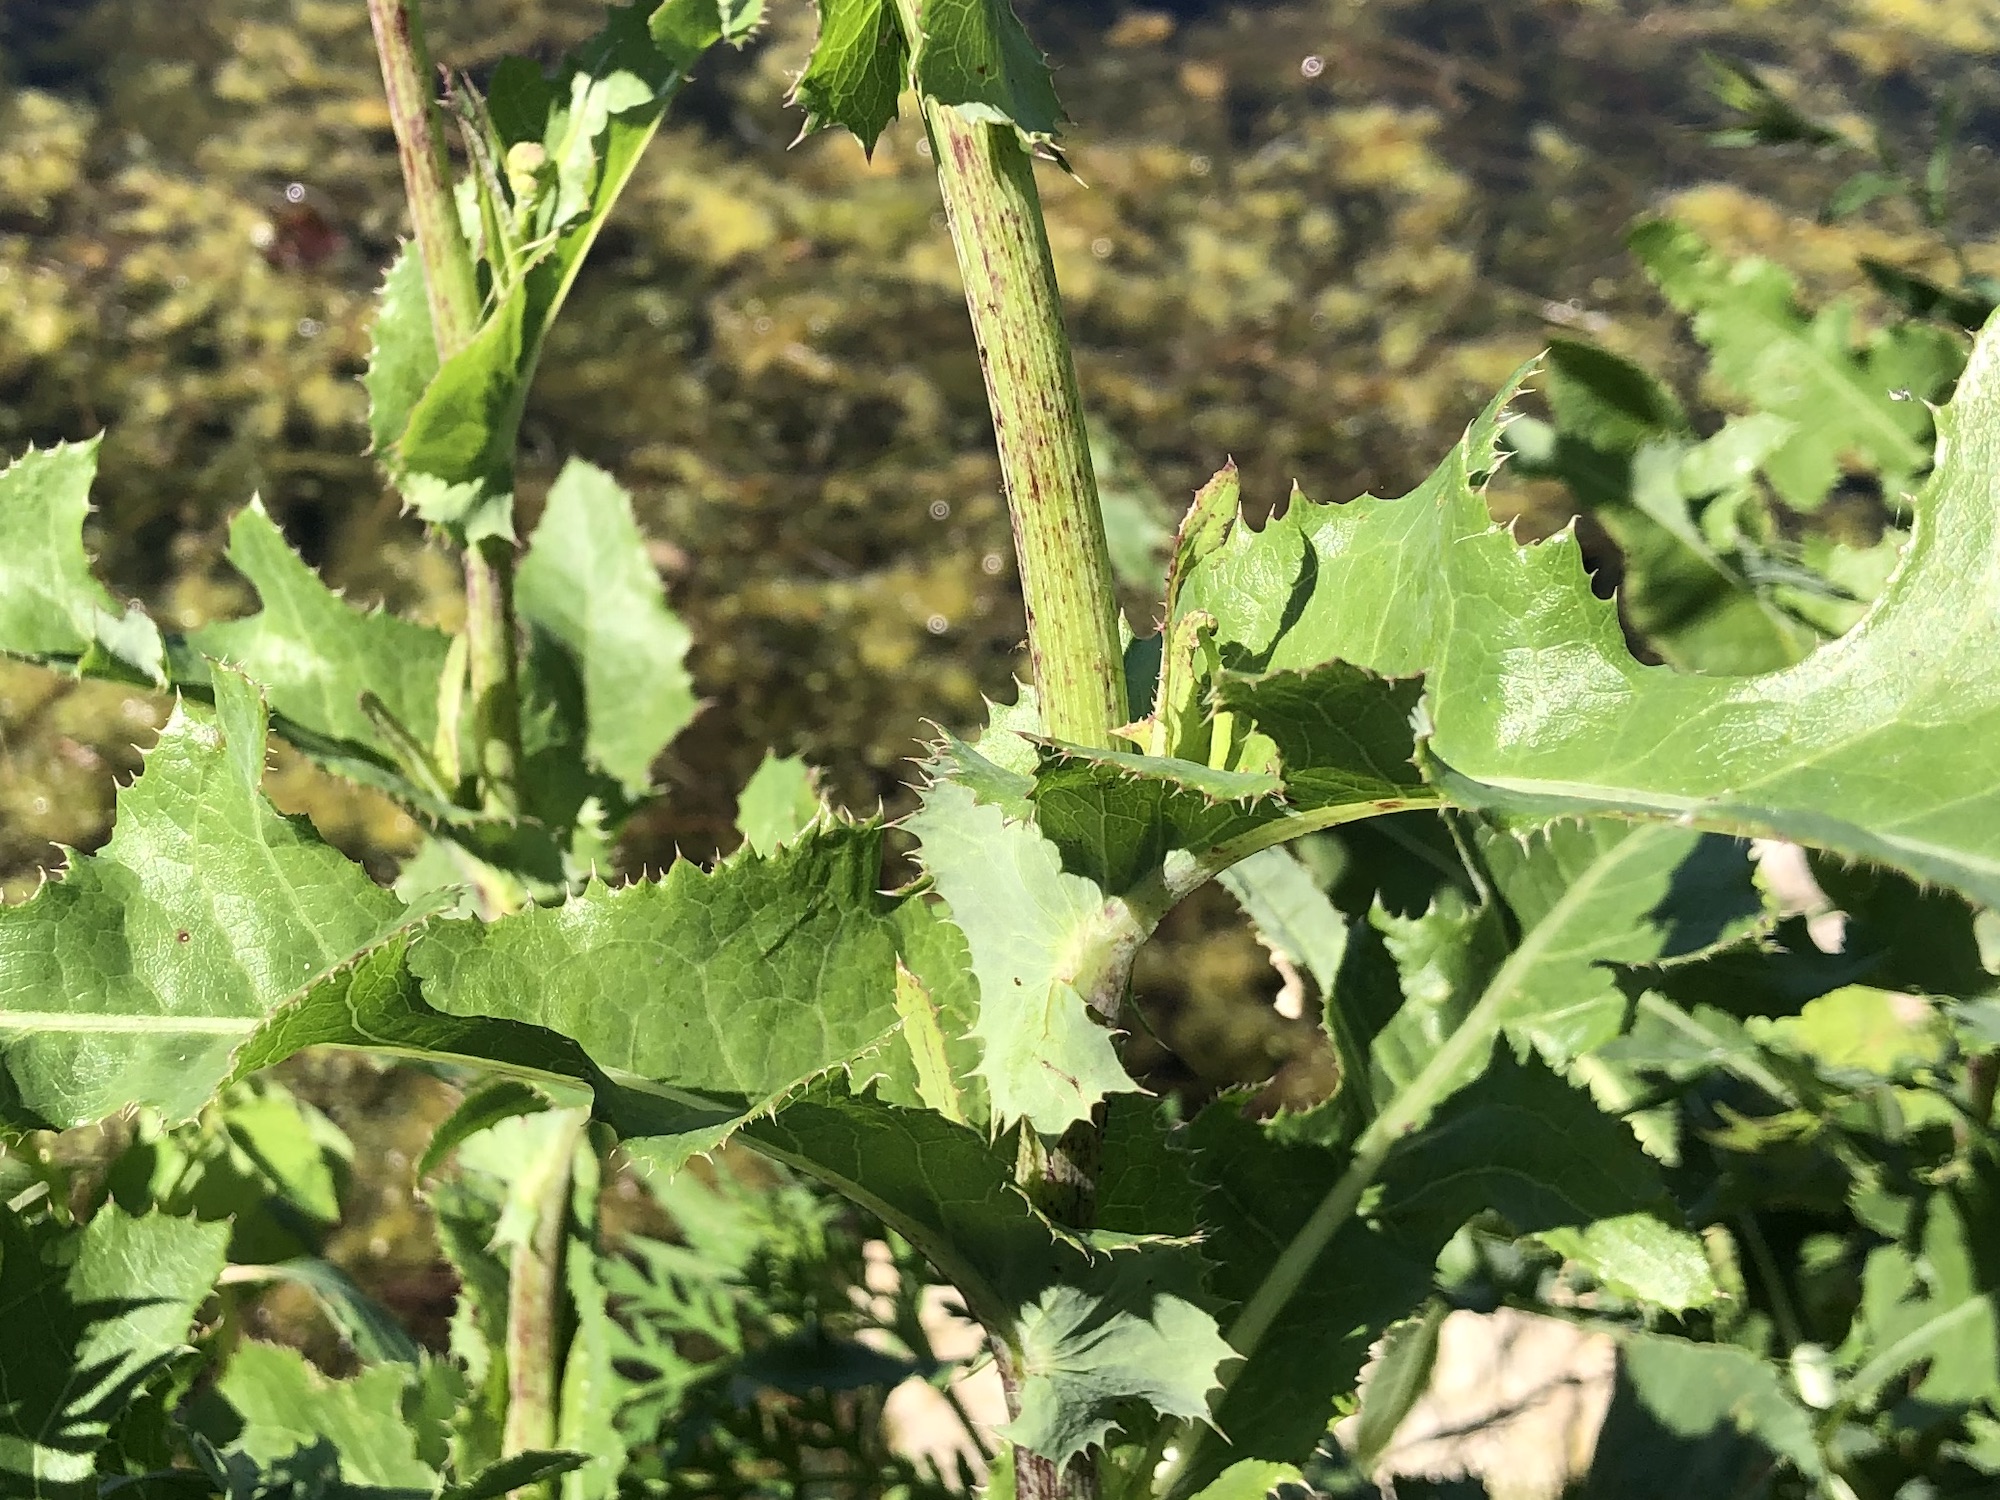 Perennial Sowthistle stem and leaves along shore of Lake Wingra on July 10, 2022.